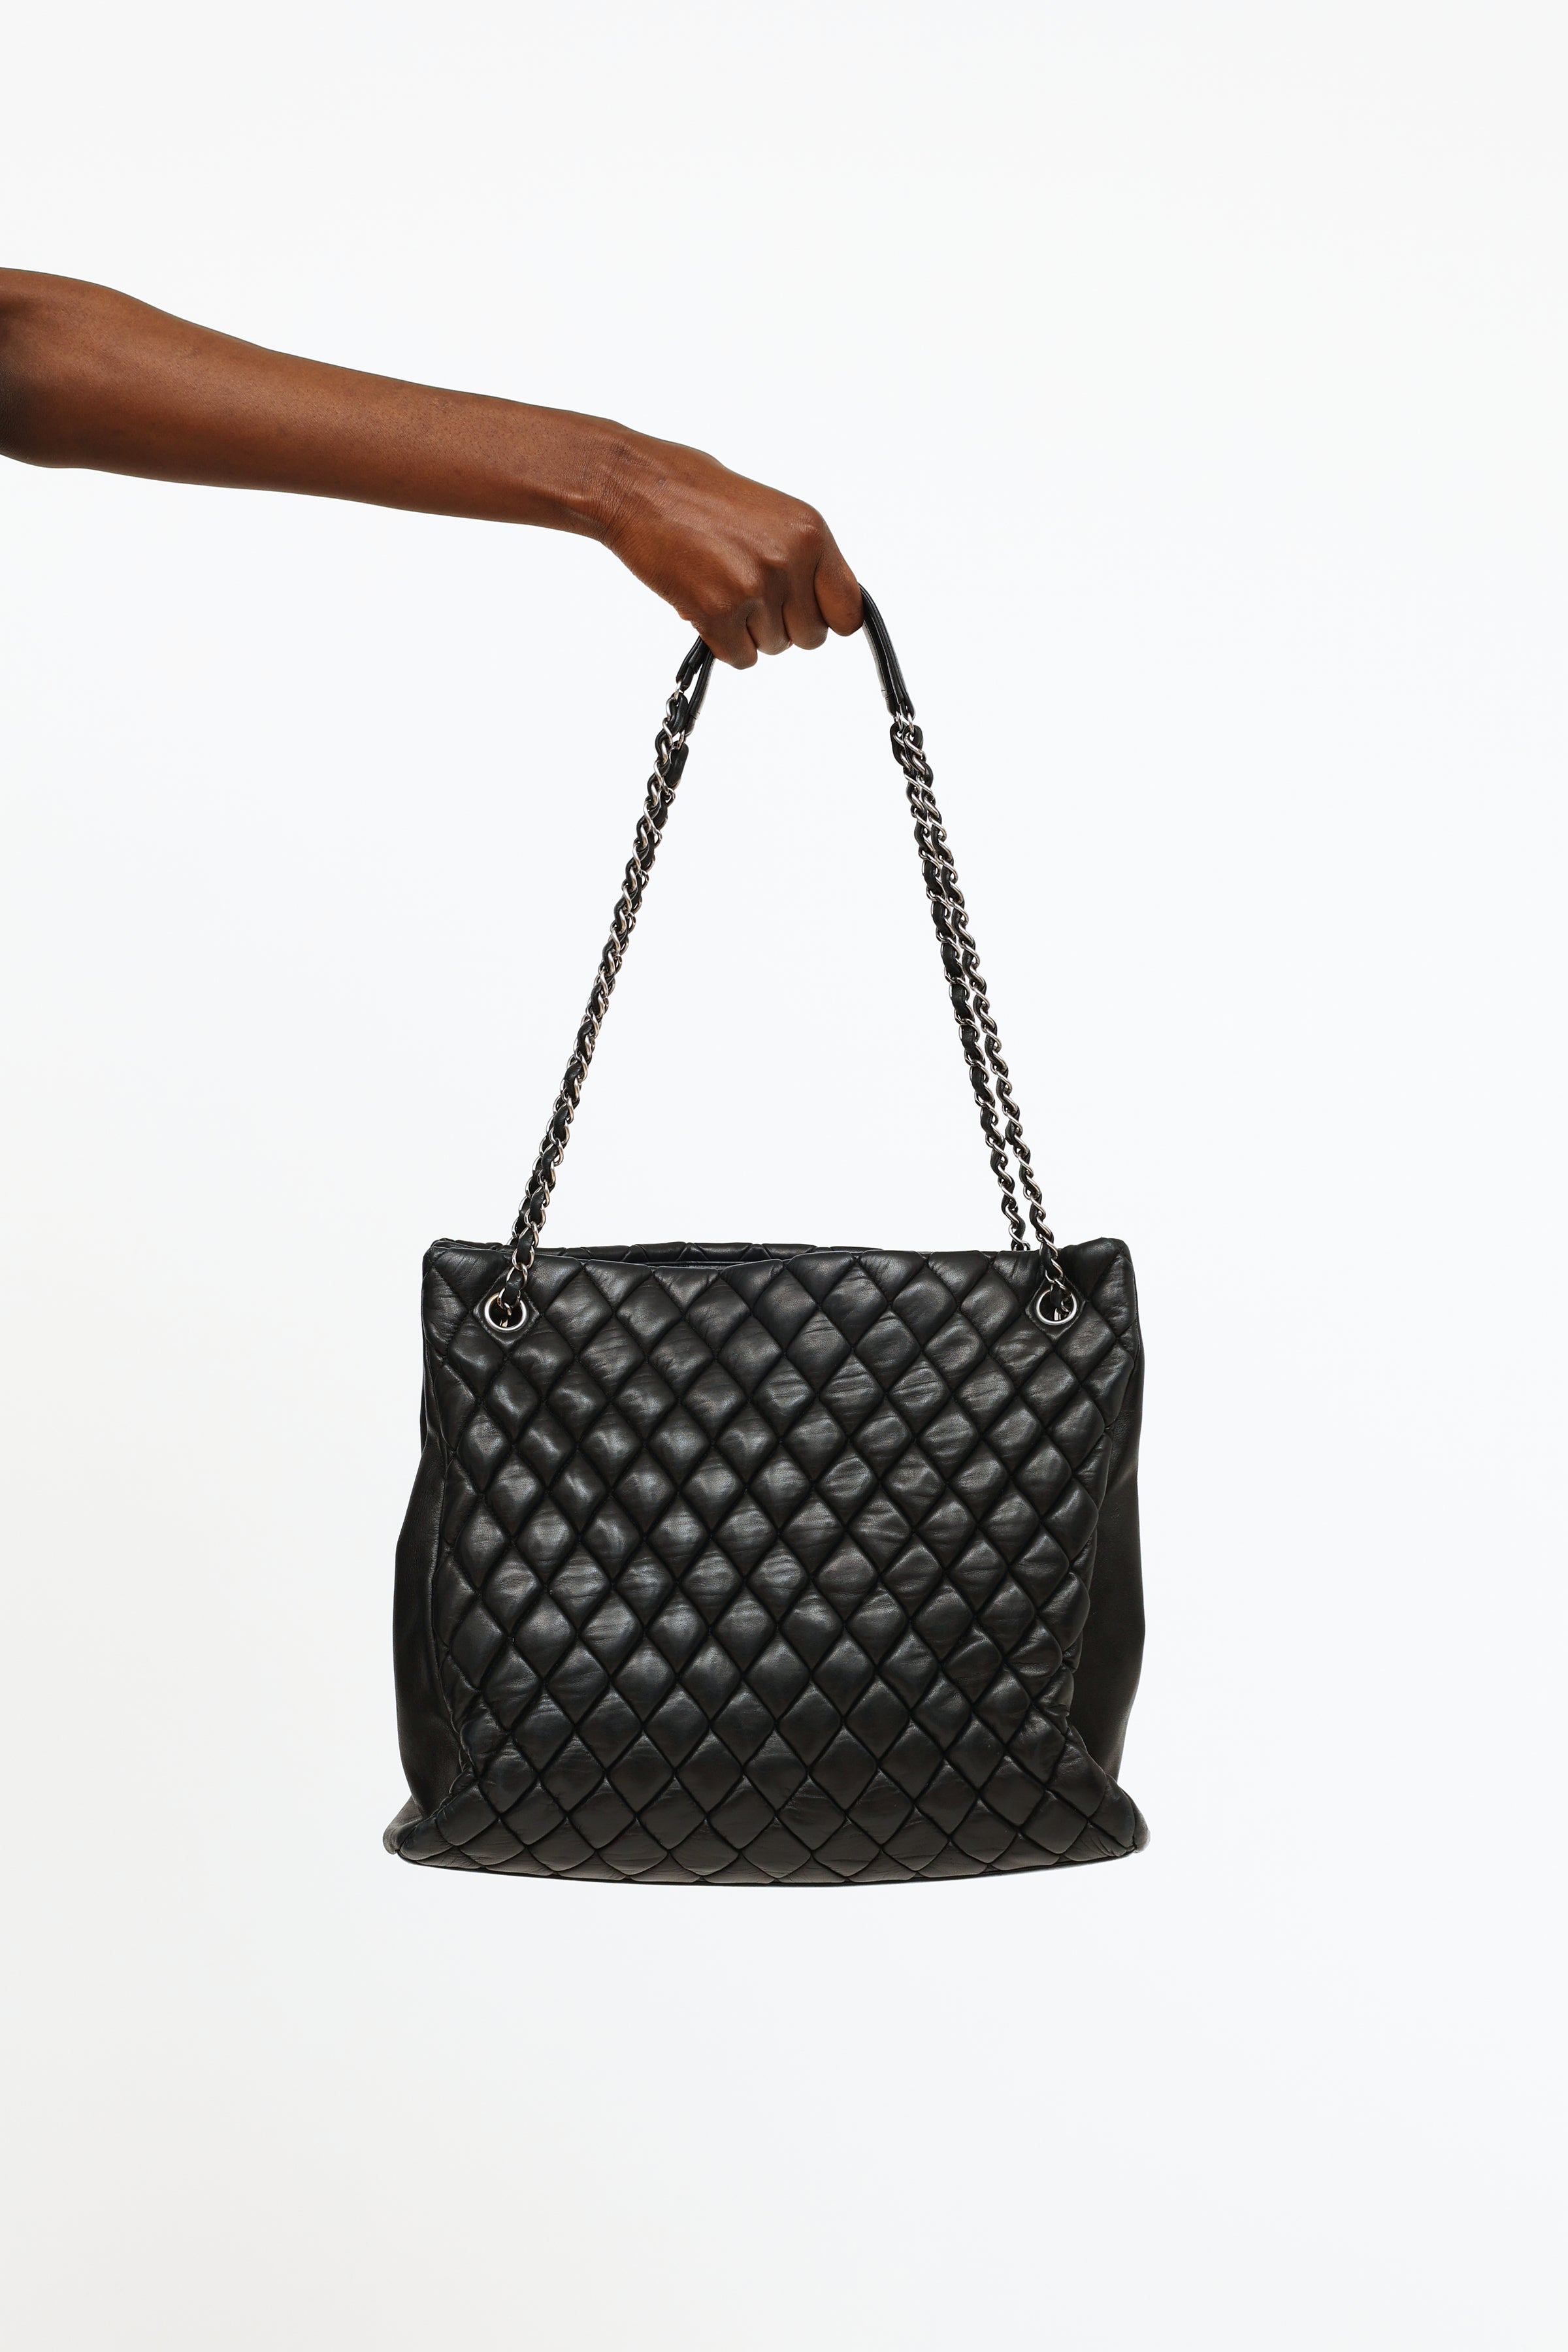 Chanel // Black Lambskin Bubble Quilted Tote Bag – VSP Consignment